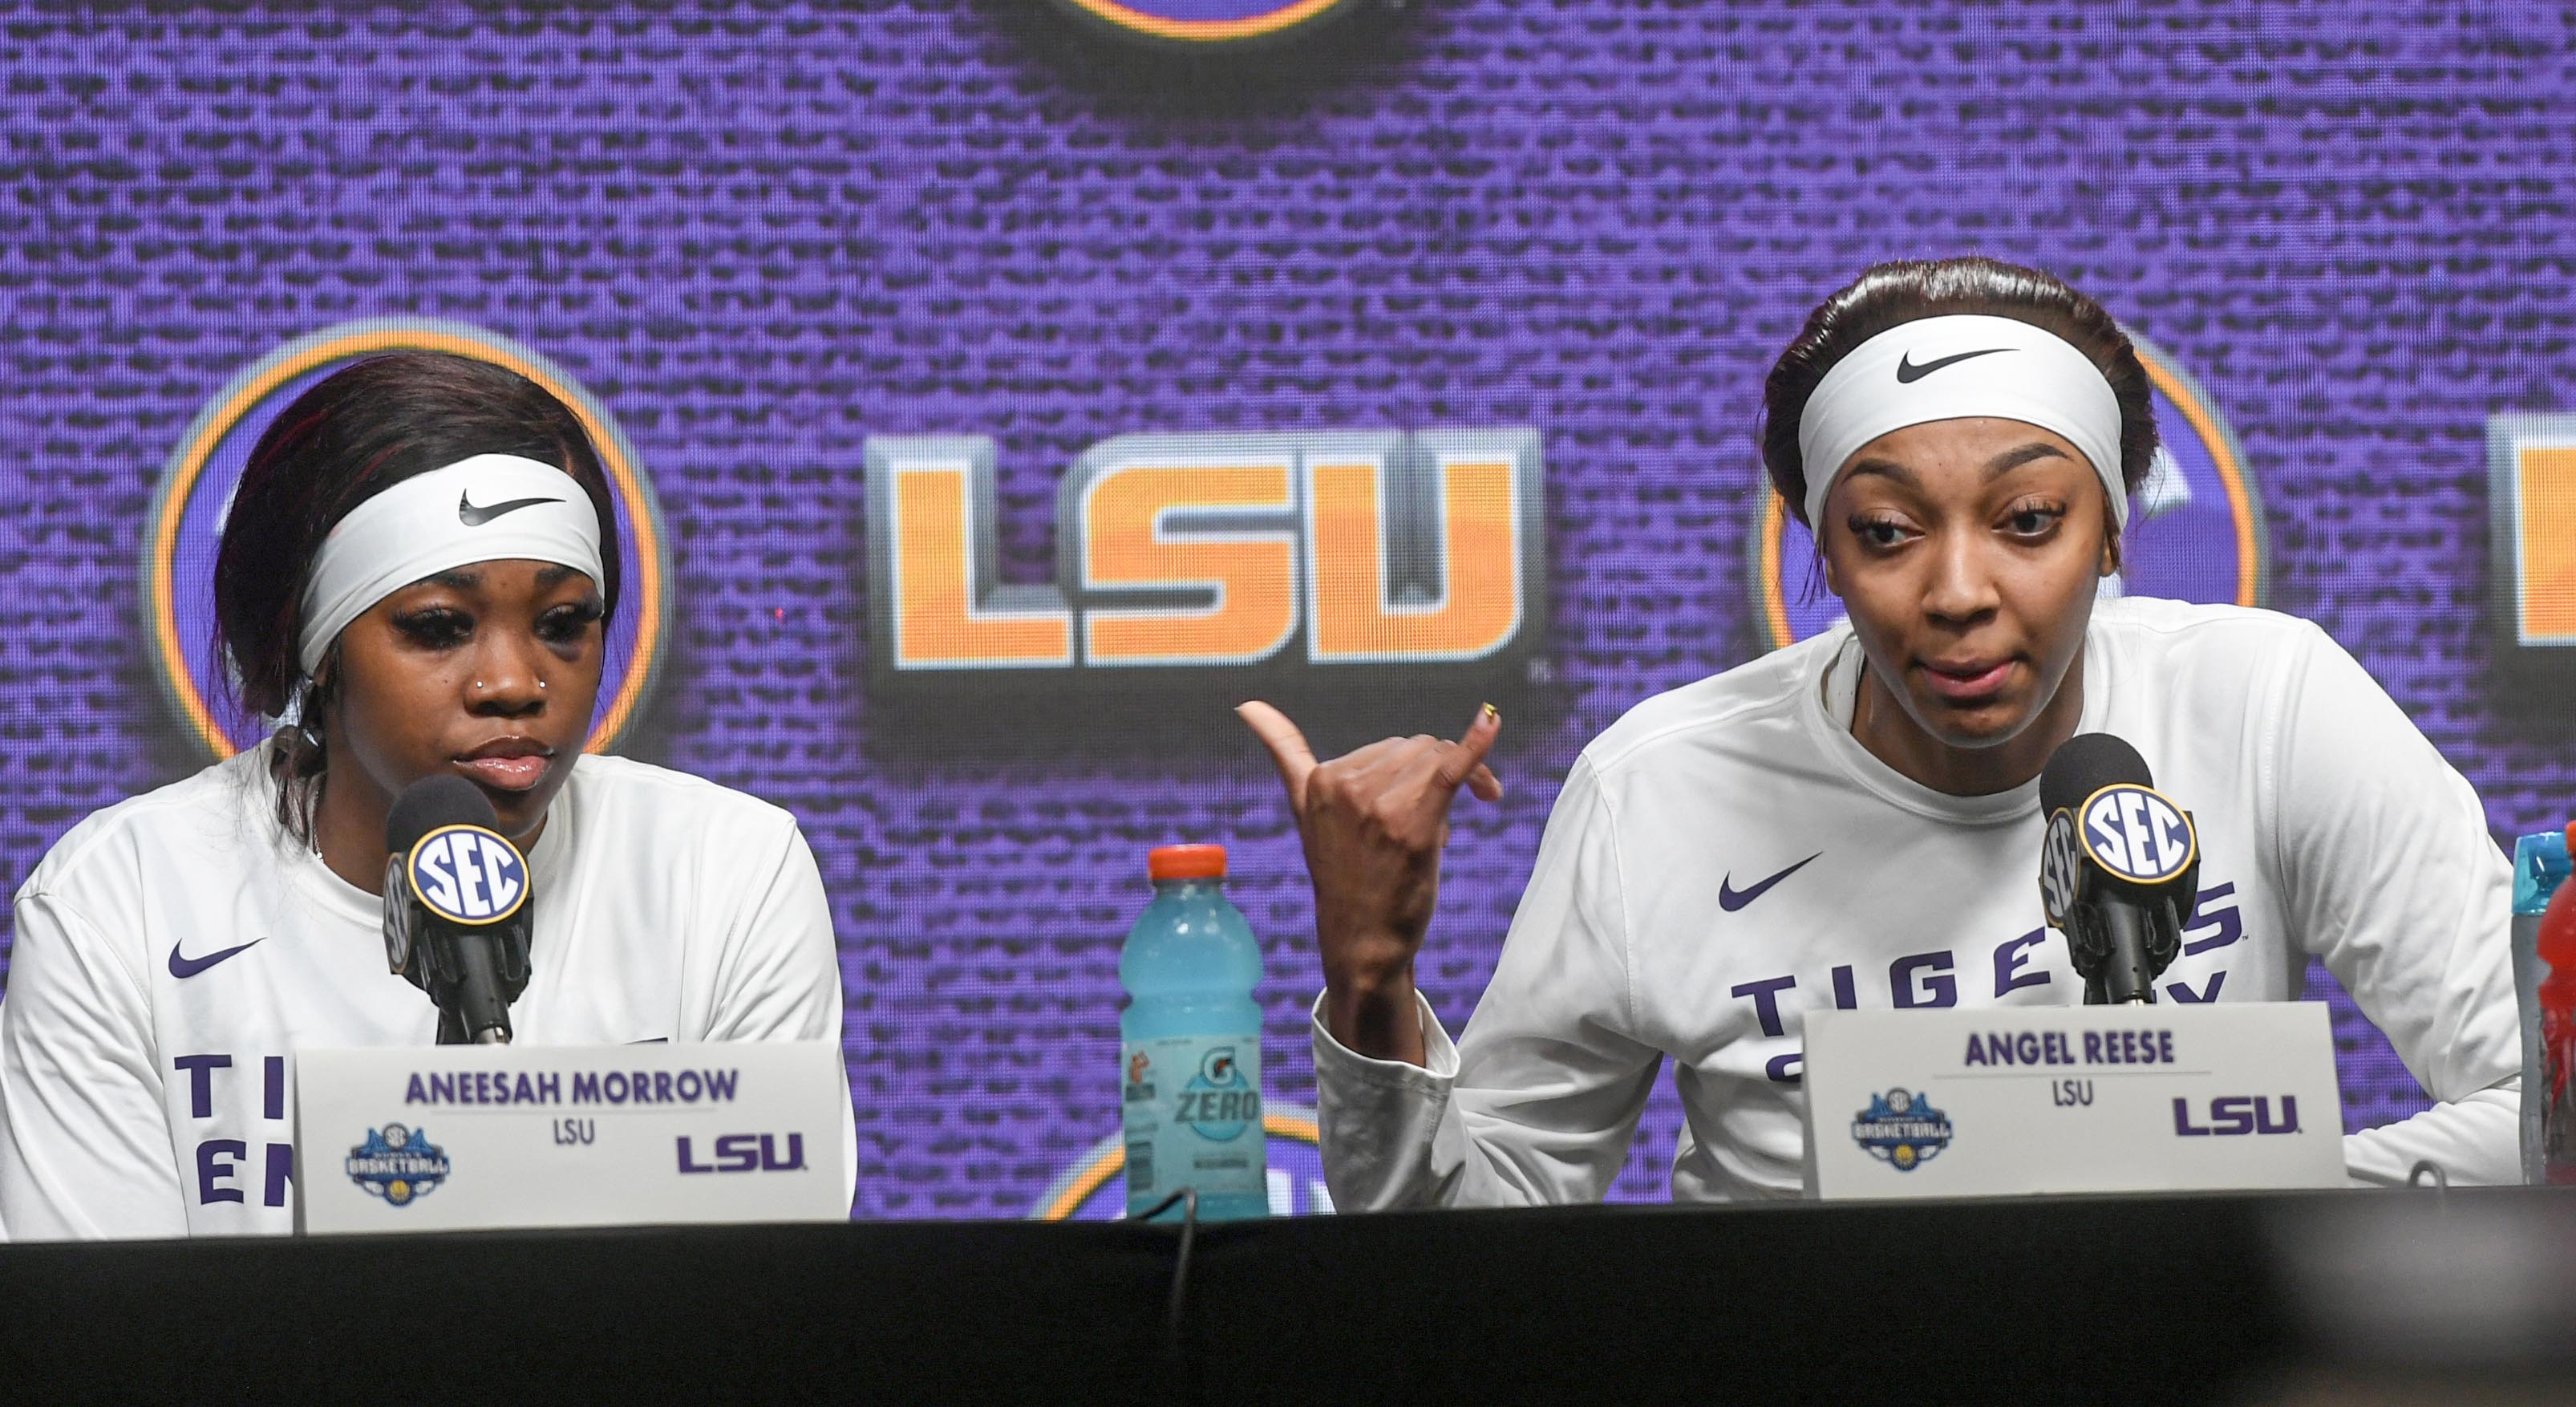 Louisiana State University forward Angel Reese, right, talks to media near teammate guard Aneesah Morrow, left, after LSU beat Ole Miss 75-67 at the SEC Women's Basketball Tournament game at the Bon Secours Wellness Arena in Greenville, S.C. Saturday, March 9, 2024.